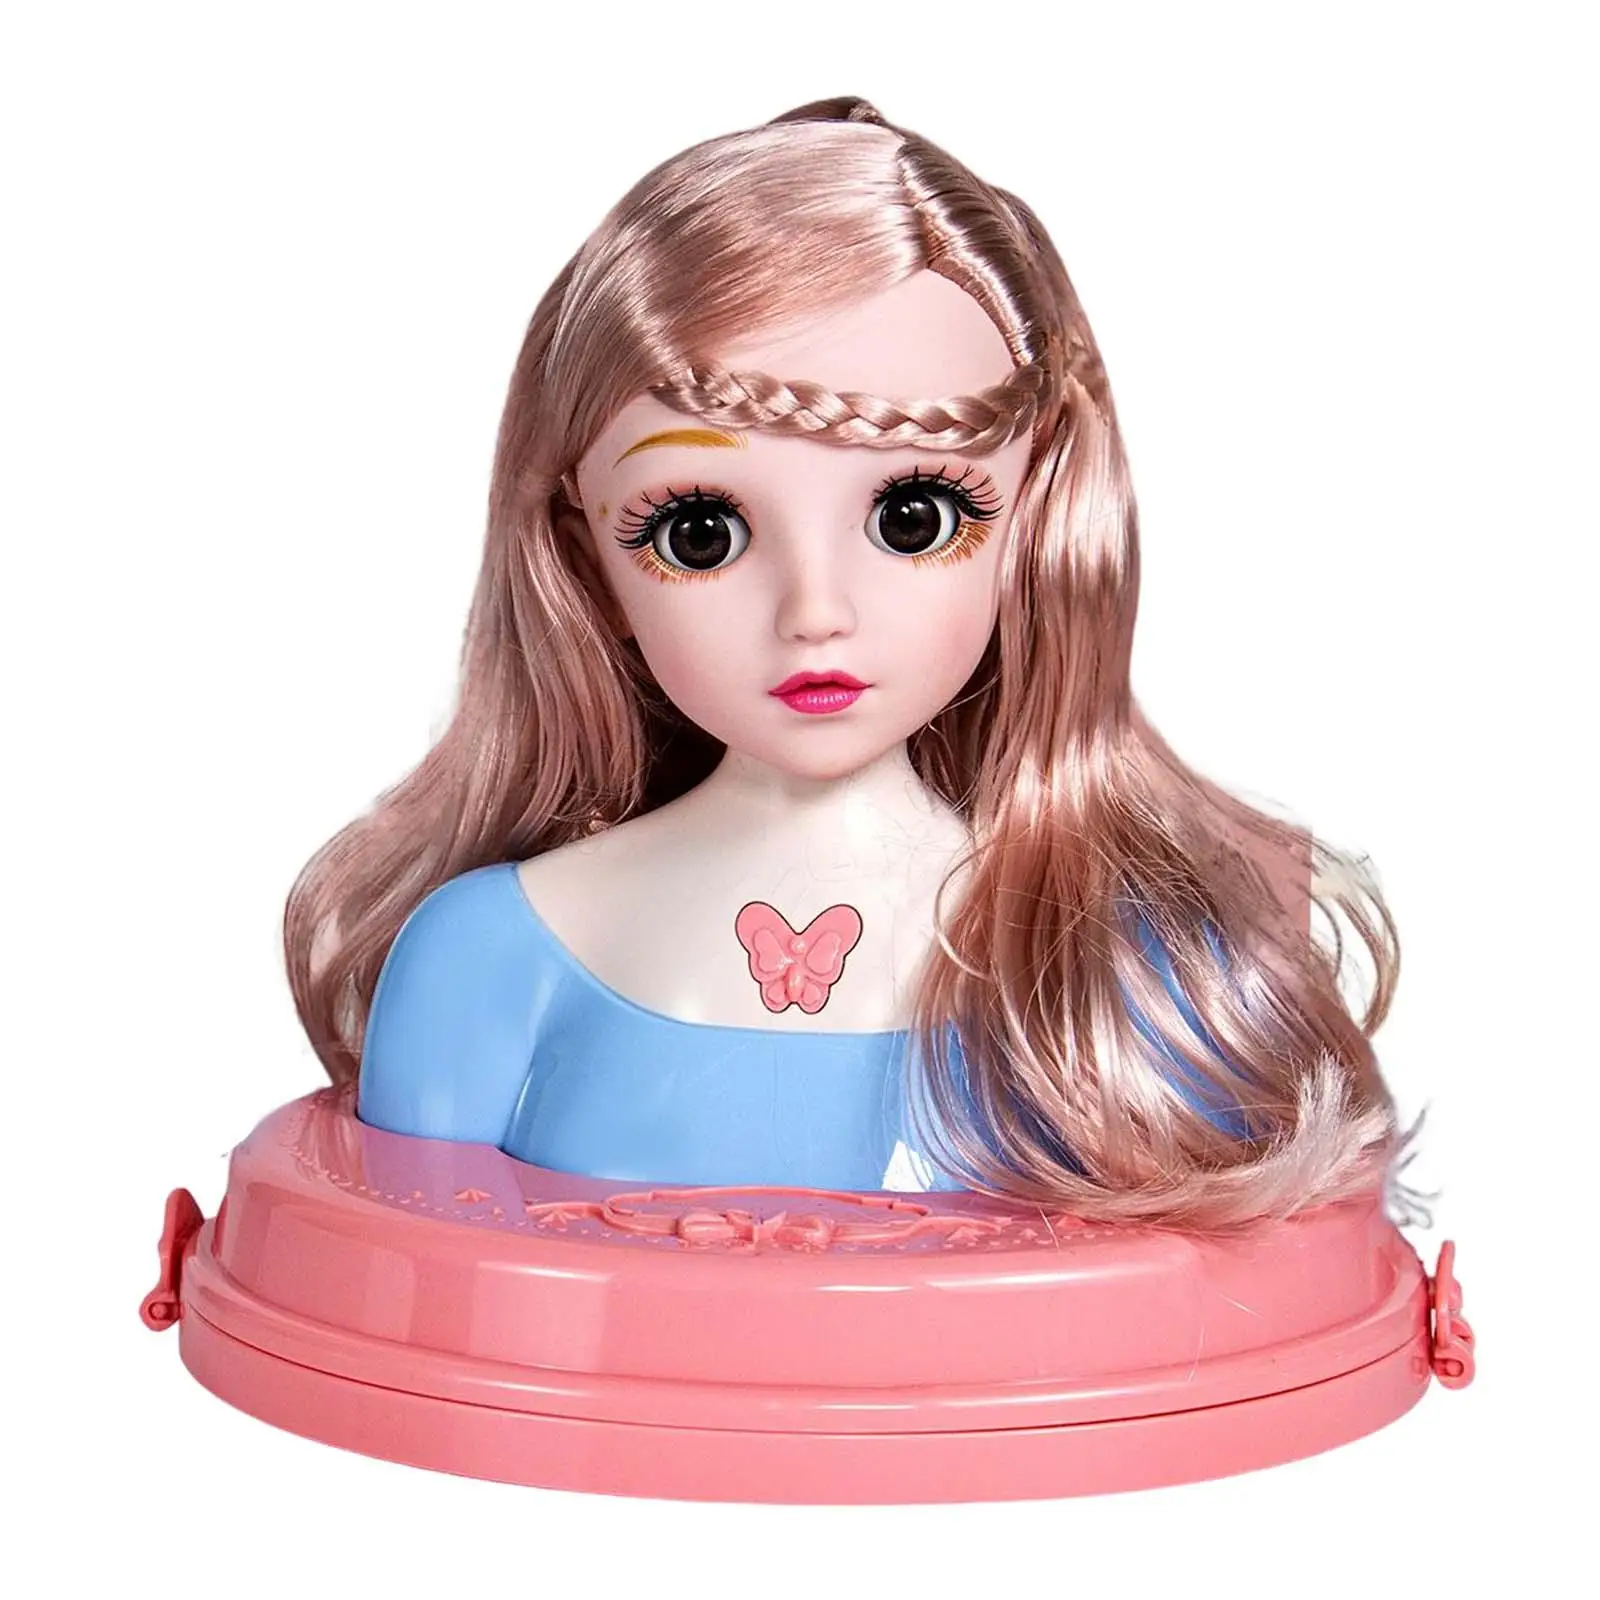 Fashion Doll Styling Head Toy Movable Eyelids Doll Hair Styling Toy for Girls Kids Gifts